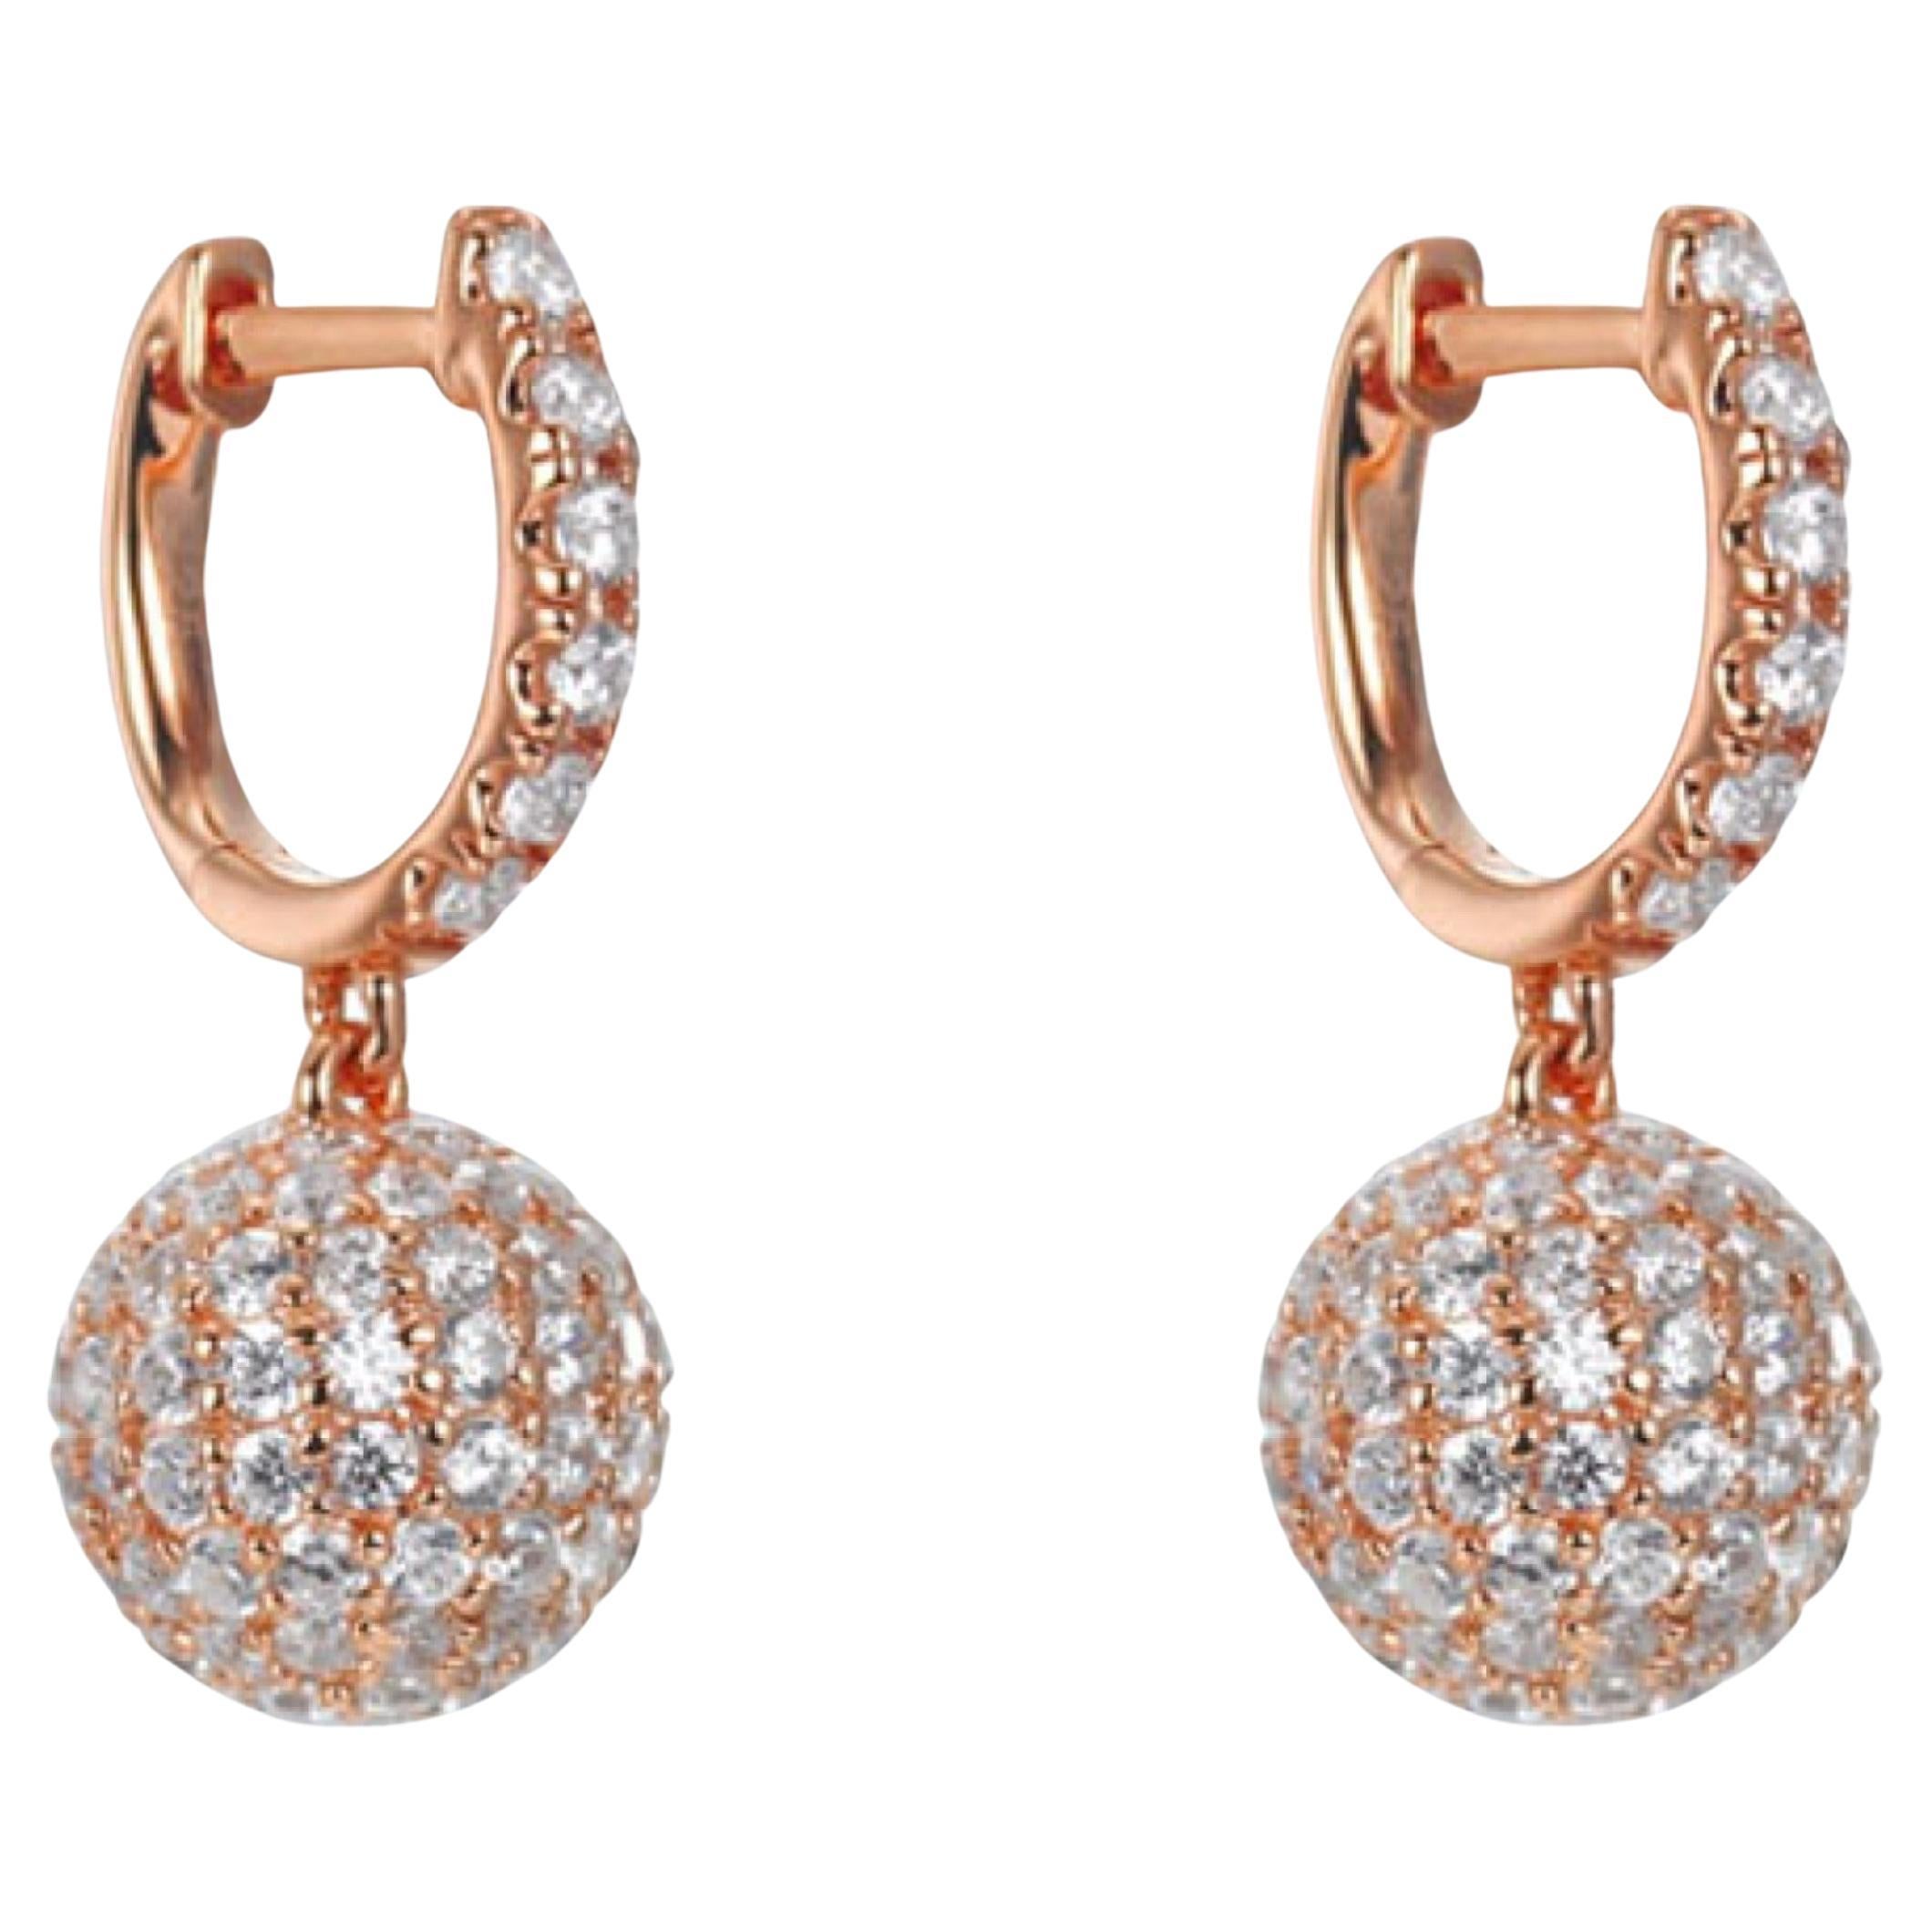 Pave brilliance with that extra Lustre sparkle.

Featuring 5.89ct of round brilliant cut cubic zirconia, set in 925 sterling silver with a 14kt rose gold finish.

Dimensions: 25mm drop.

Also available with high gloss white rhodium or a 14kt yellow